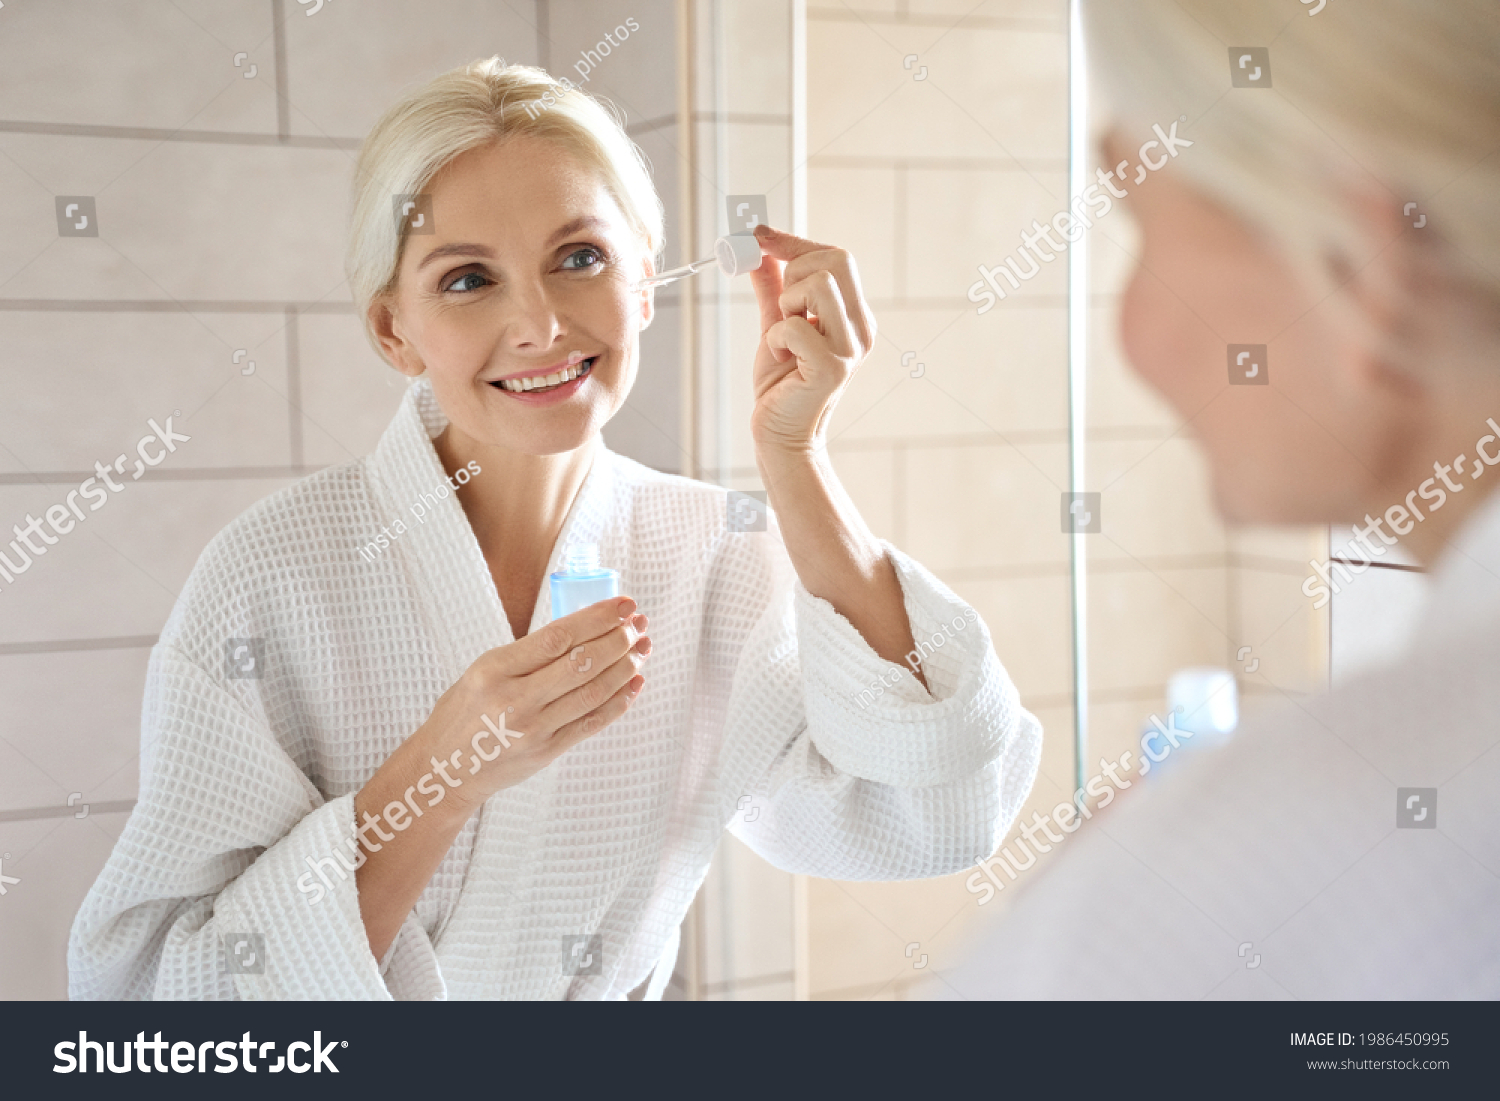 Senior mature older caucasian woman touching clean face eye contour with antiaging pipette serum essence oil looking at mirror wearing bathrobe. Anti wrinkle prevention skin care products concept. #1986450995